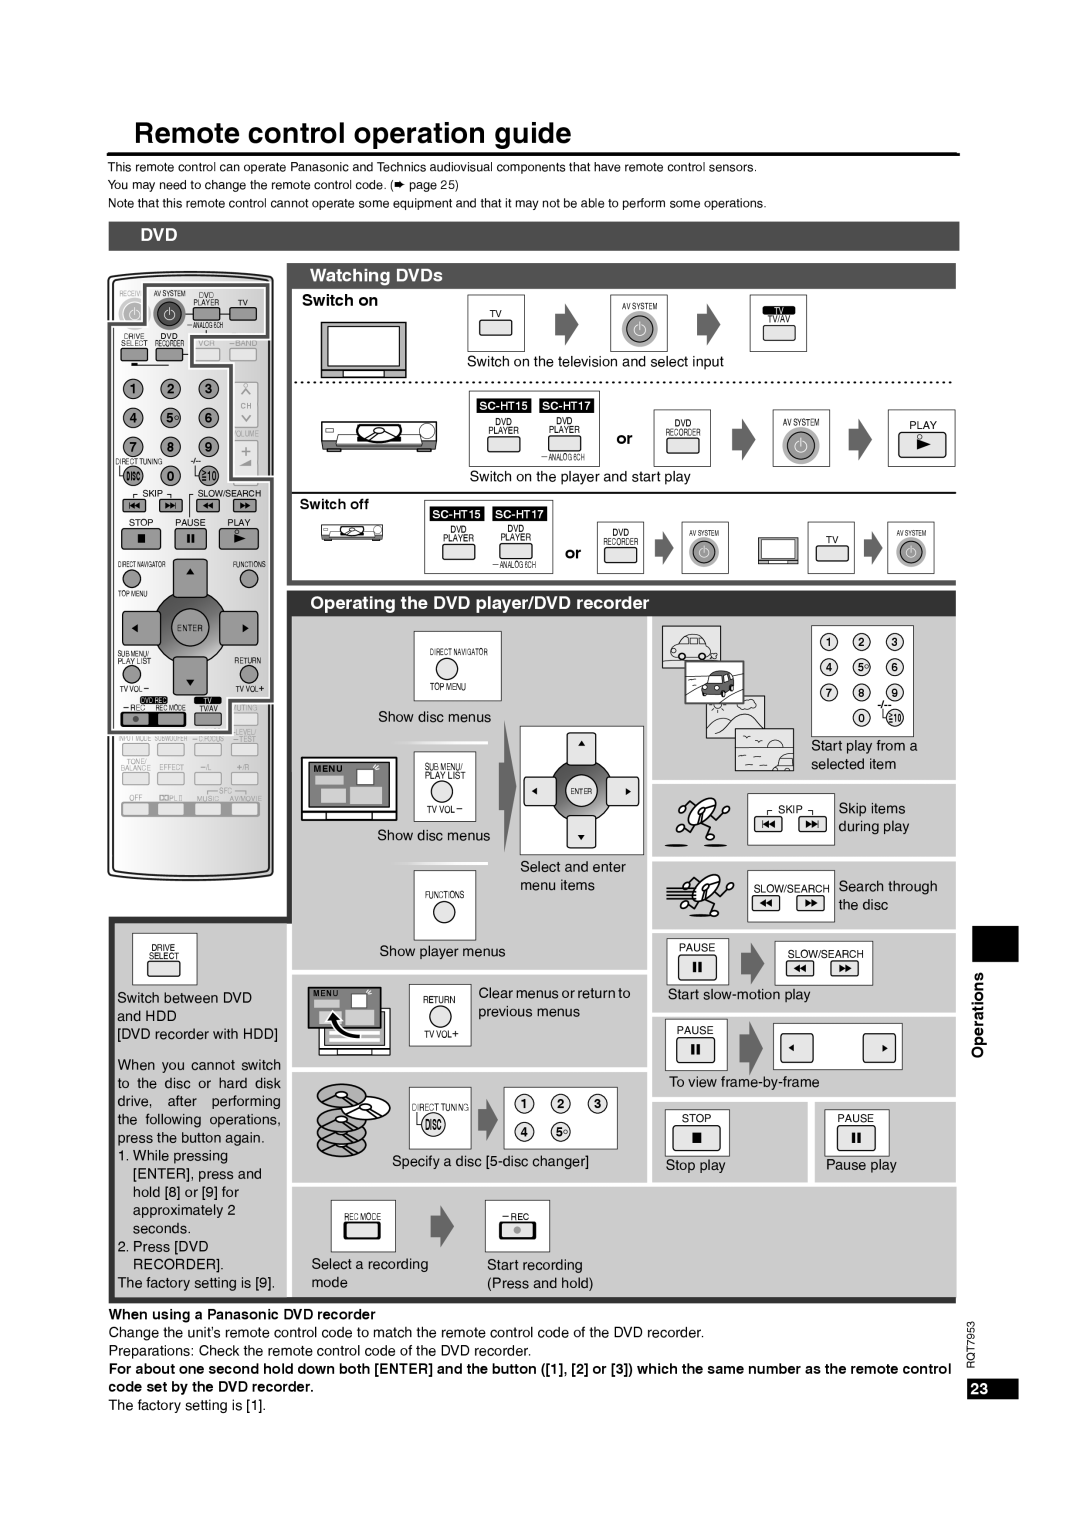 Panasonic SC-HT17 Remote control operation guide, DVD Watching DVDs, Operating the DVD player/DVD recorder 